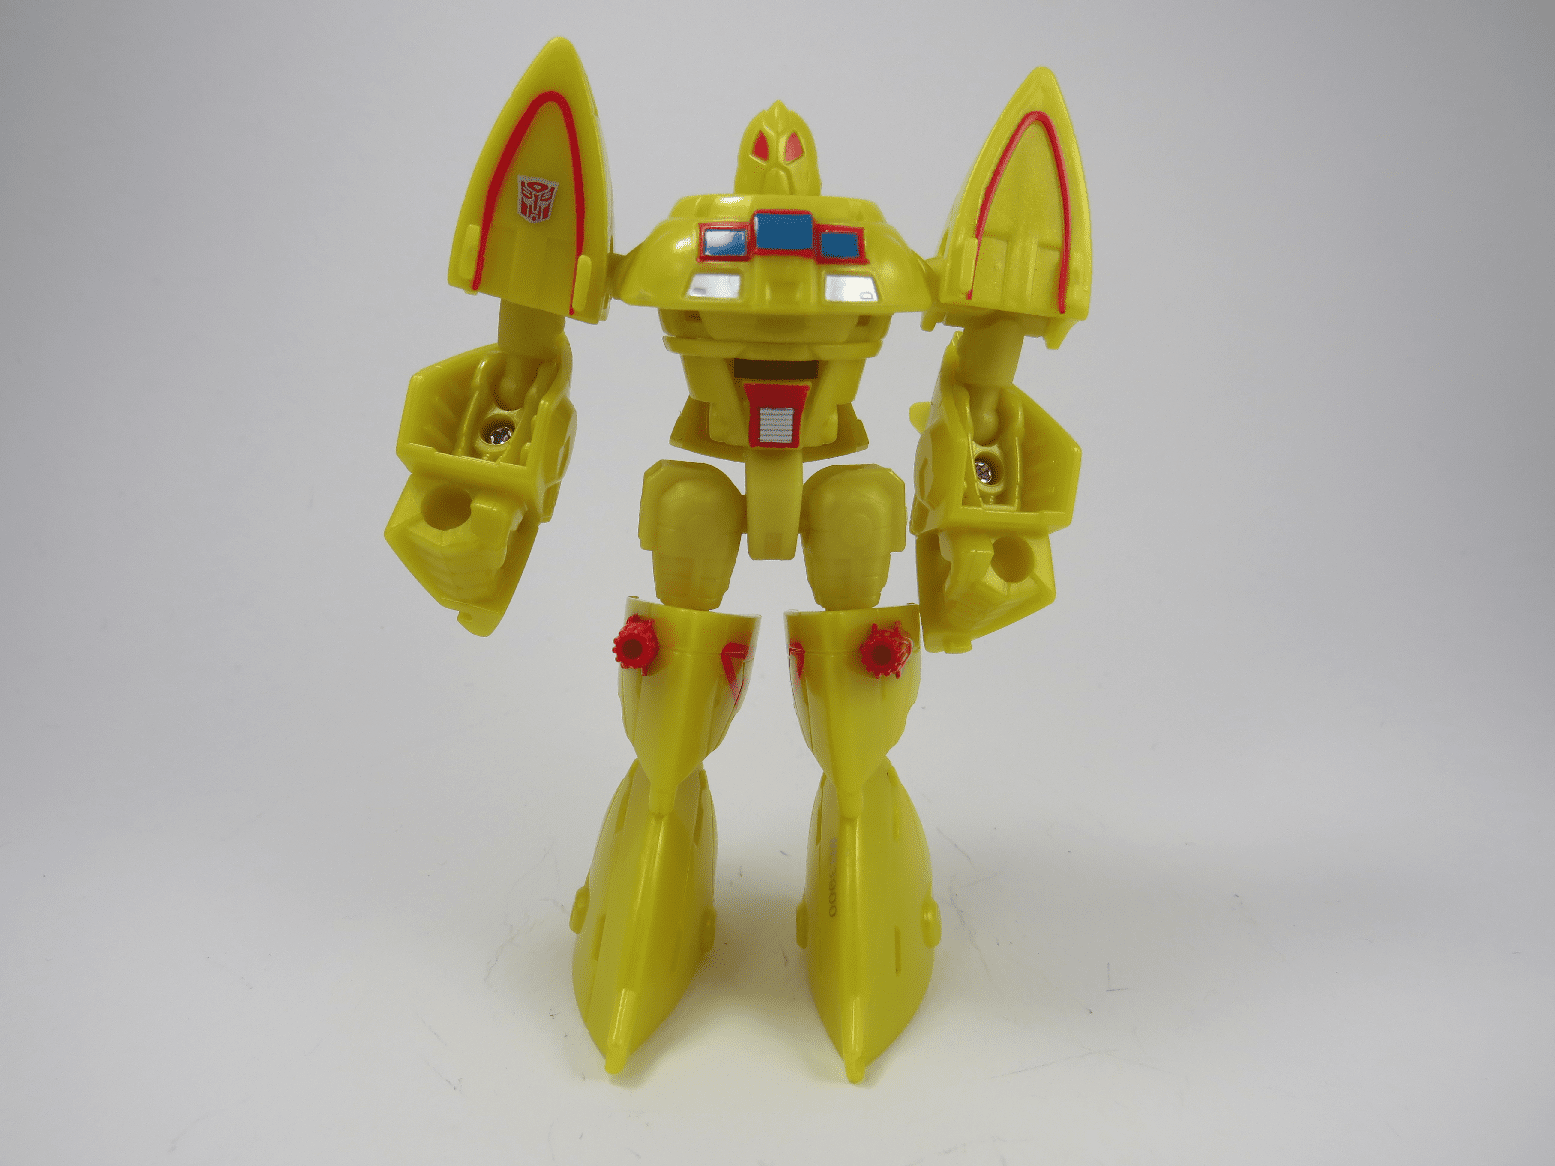 Robot mode. (Scrounge from the Computron gift set)